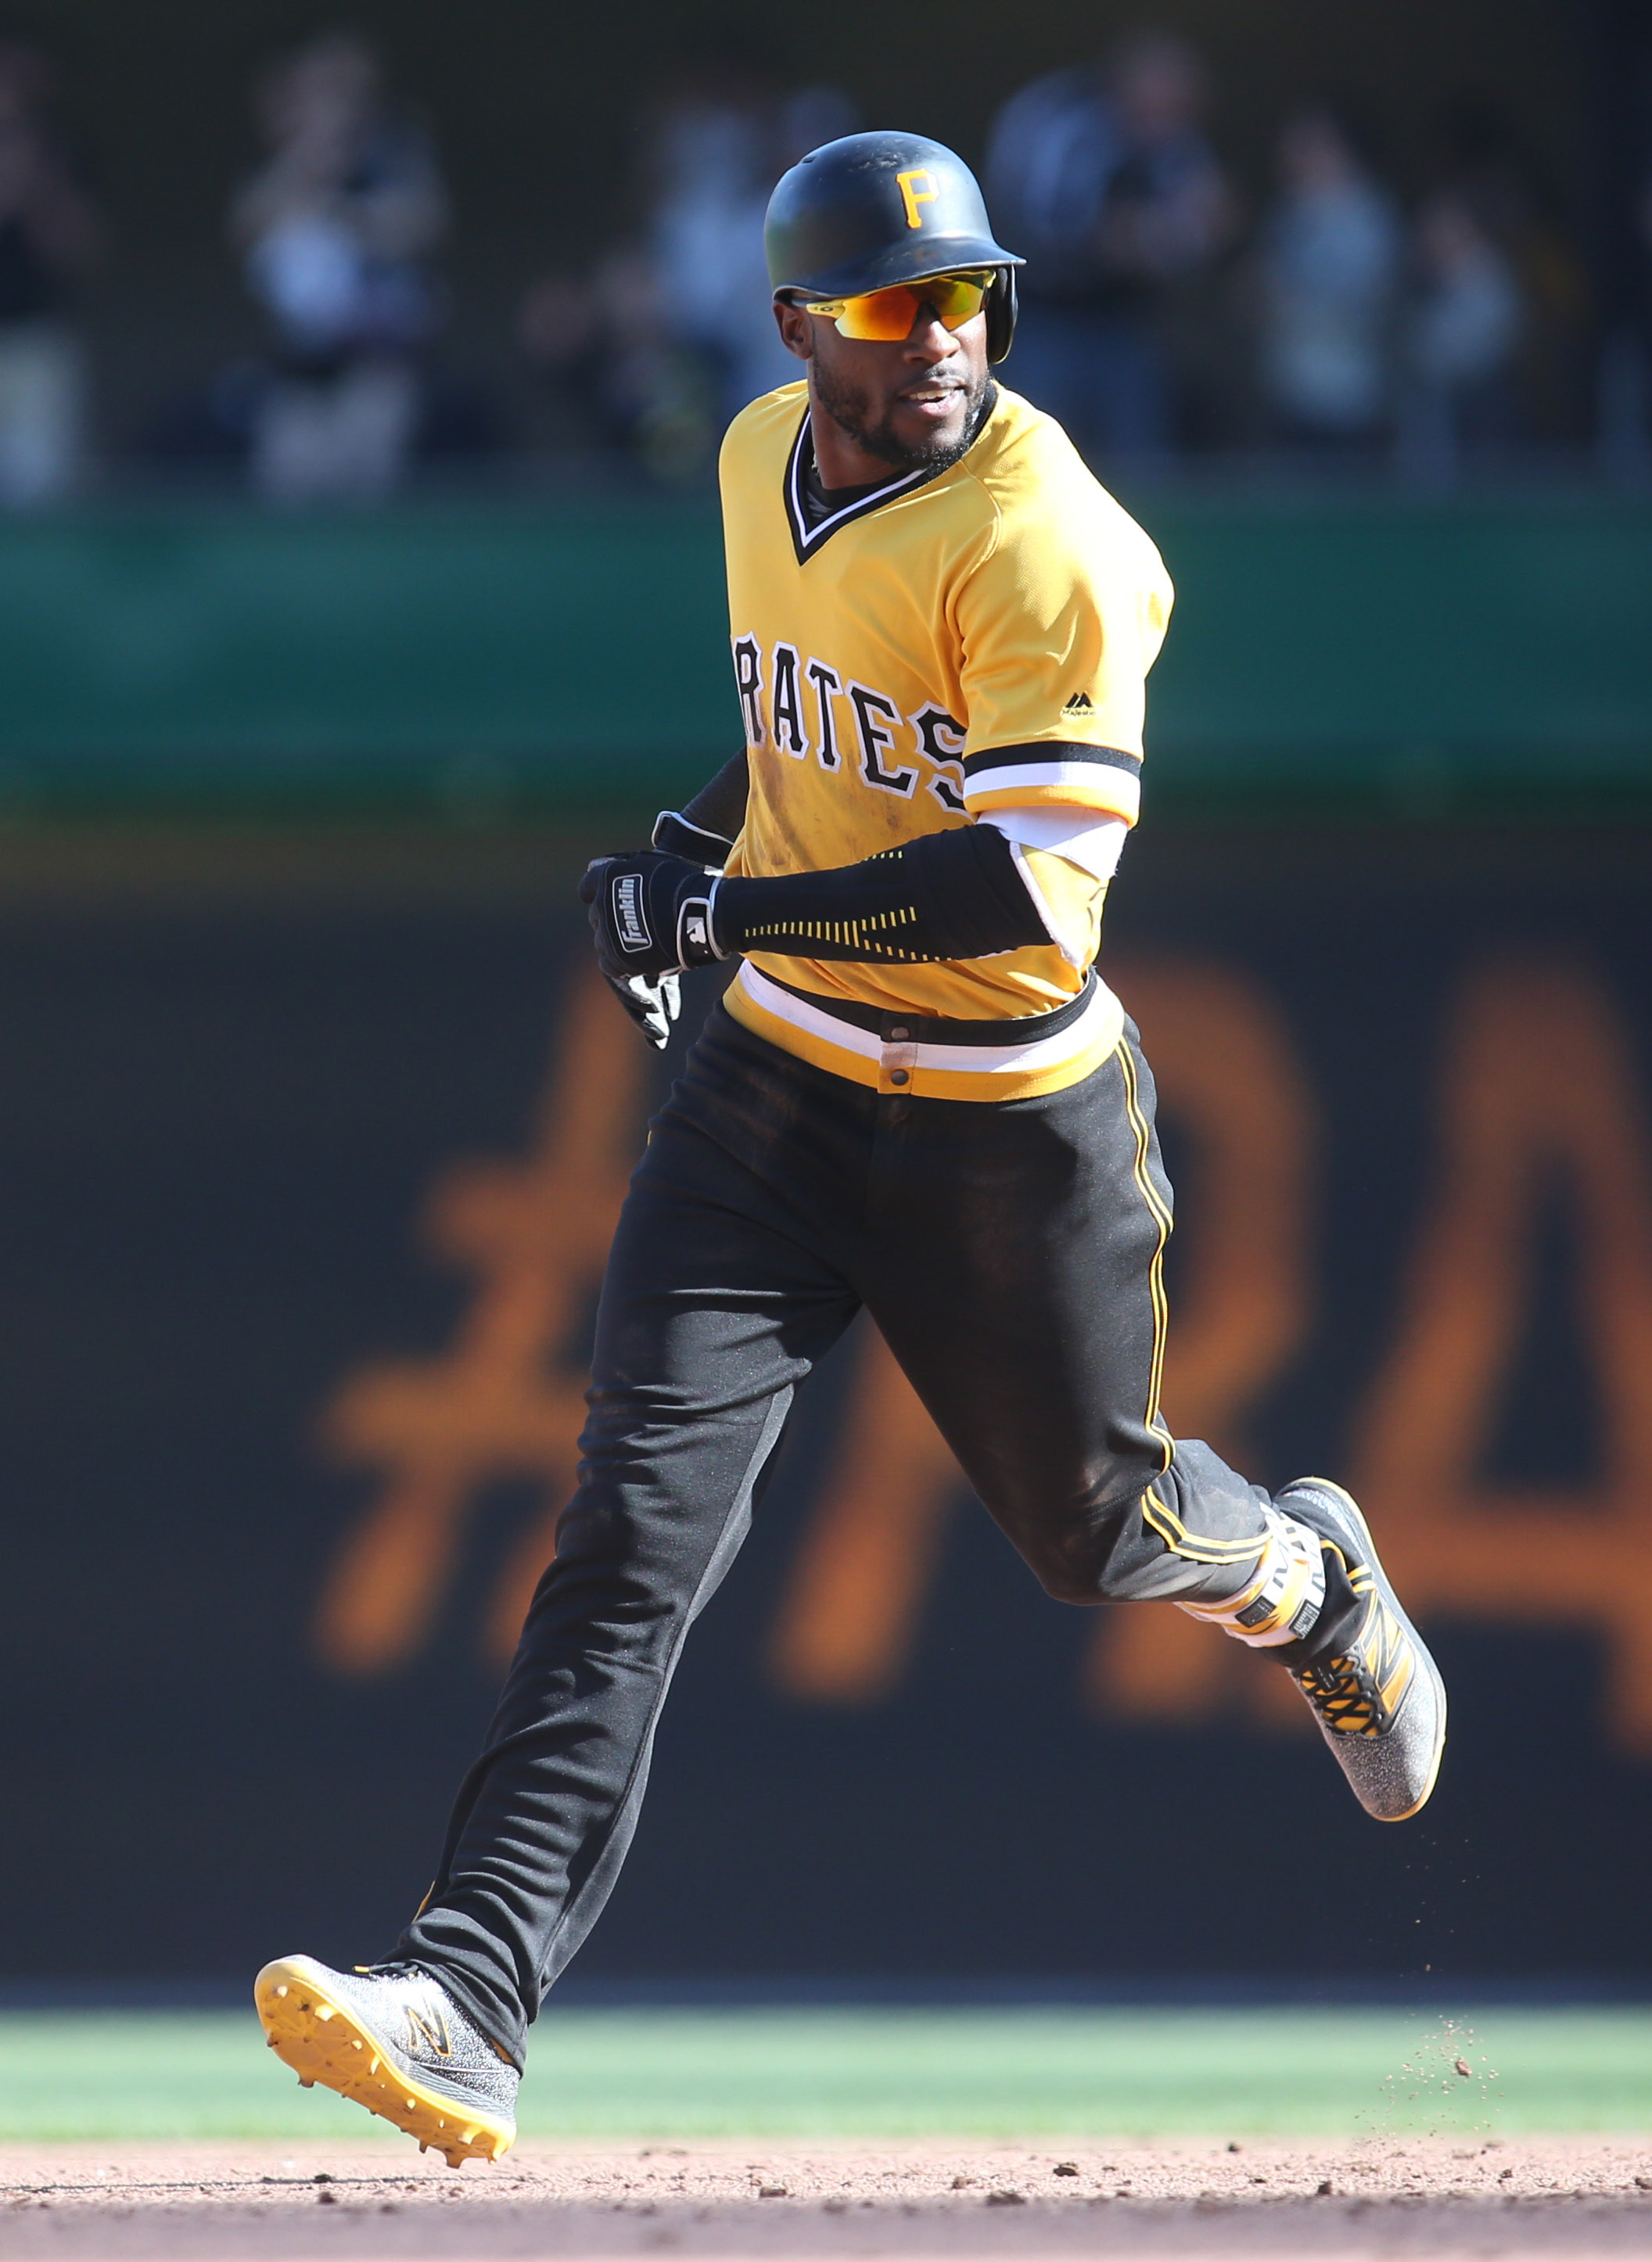 MLB report: Pirates OF Starling Marte banned 80 games for PEDs